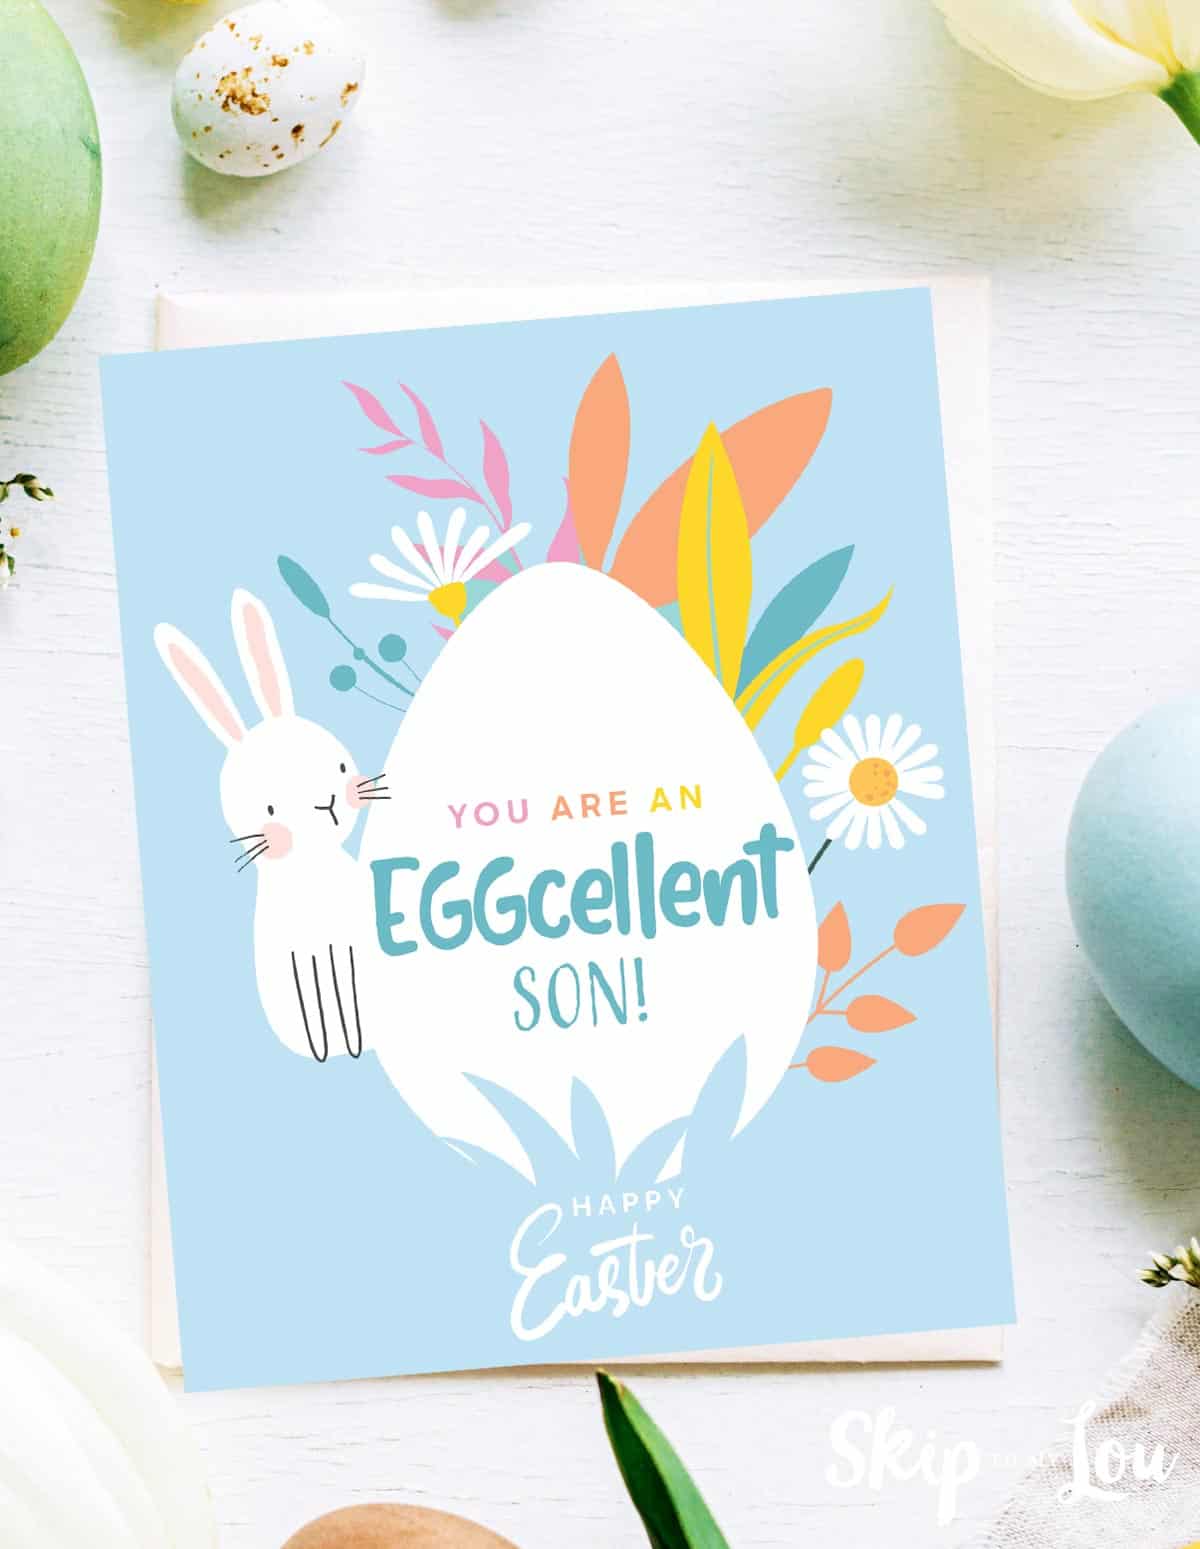 happy easter son card with eggs around the card